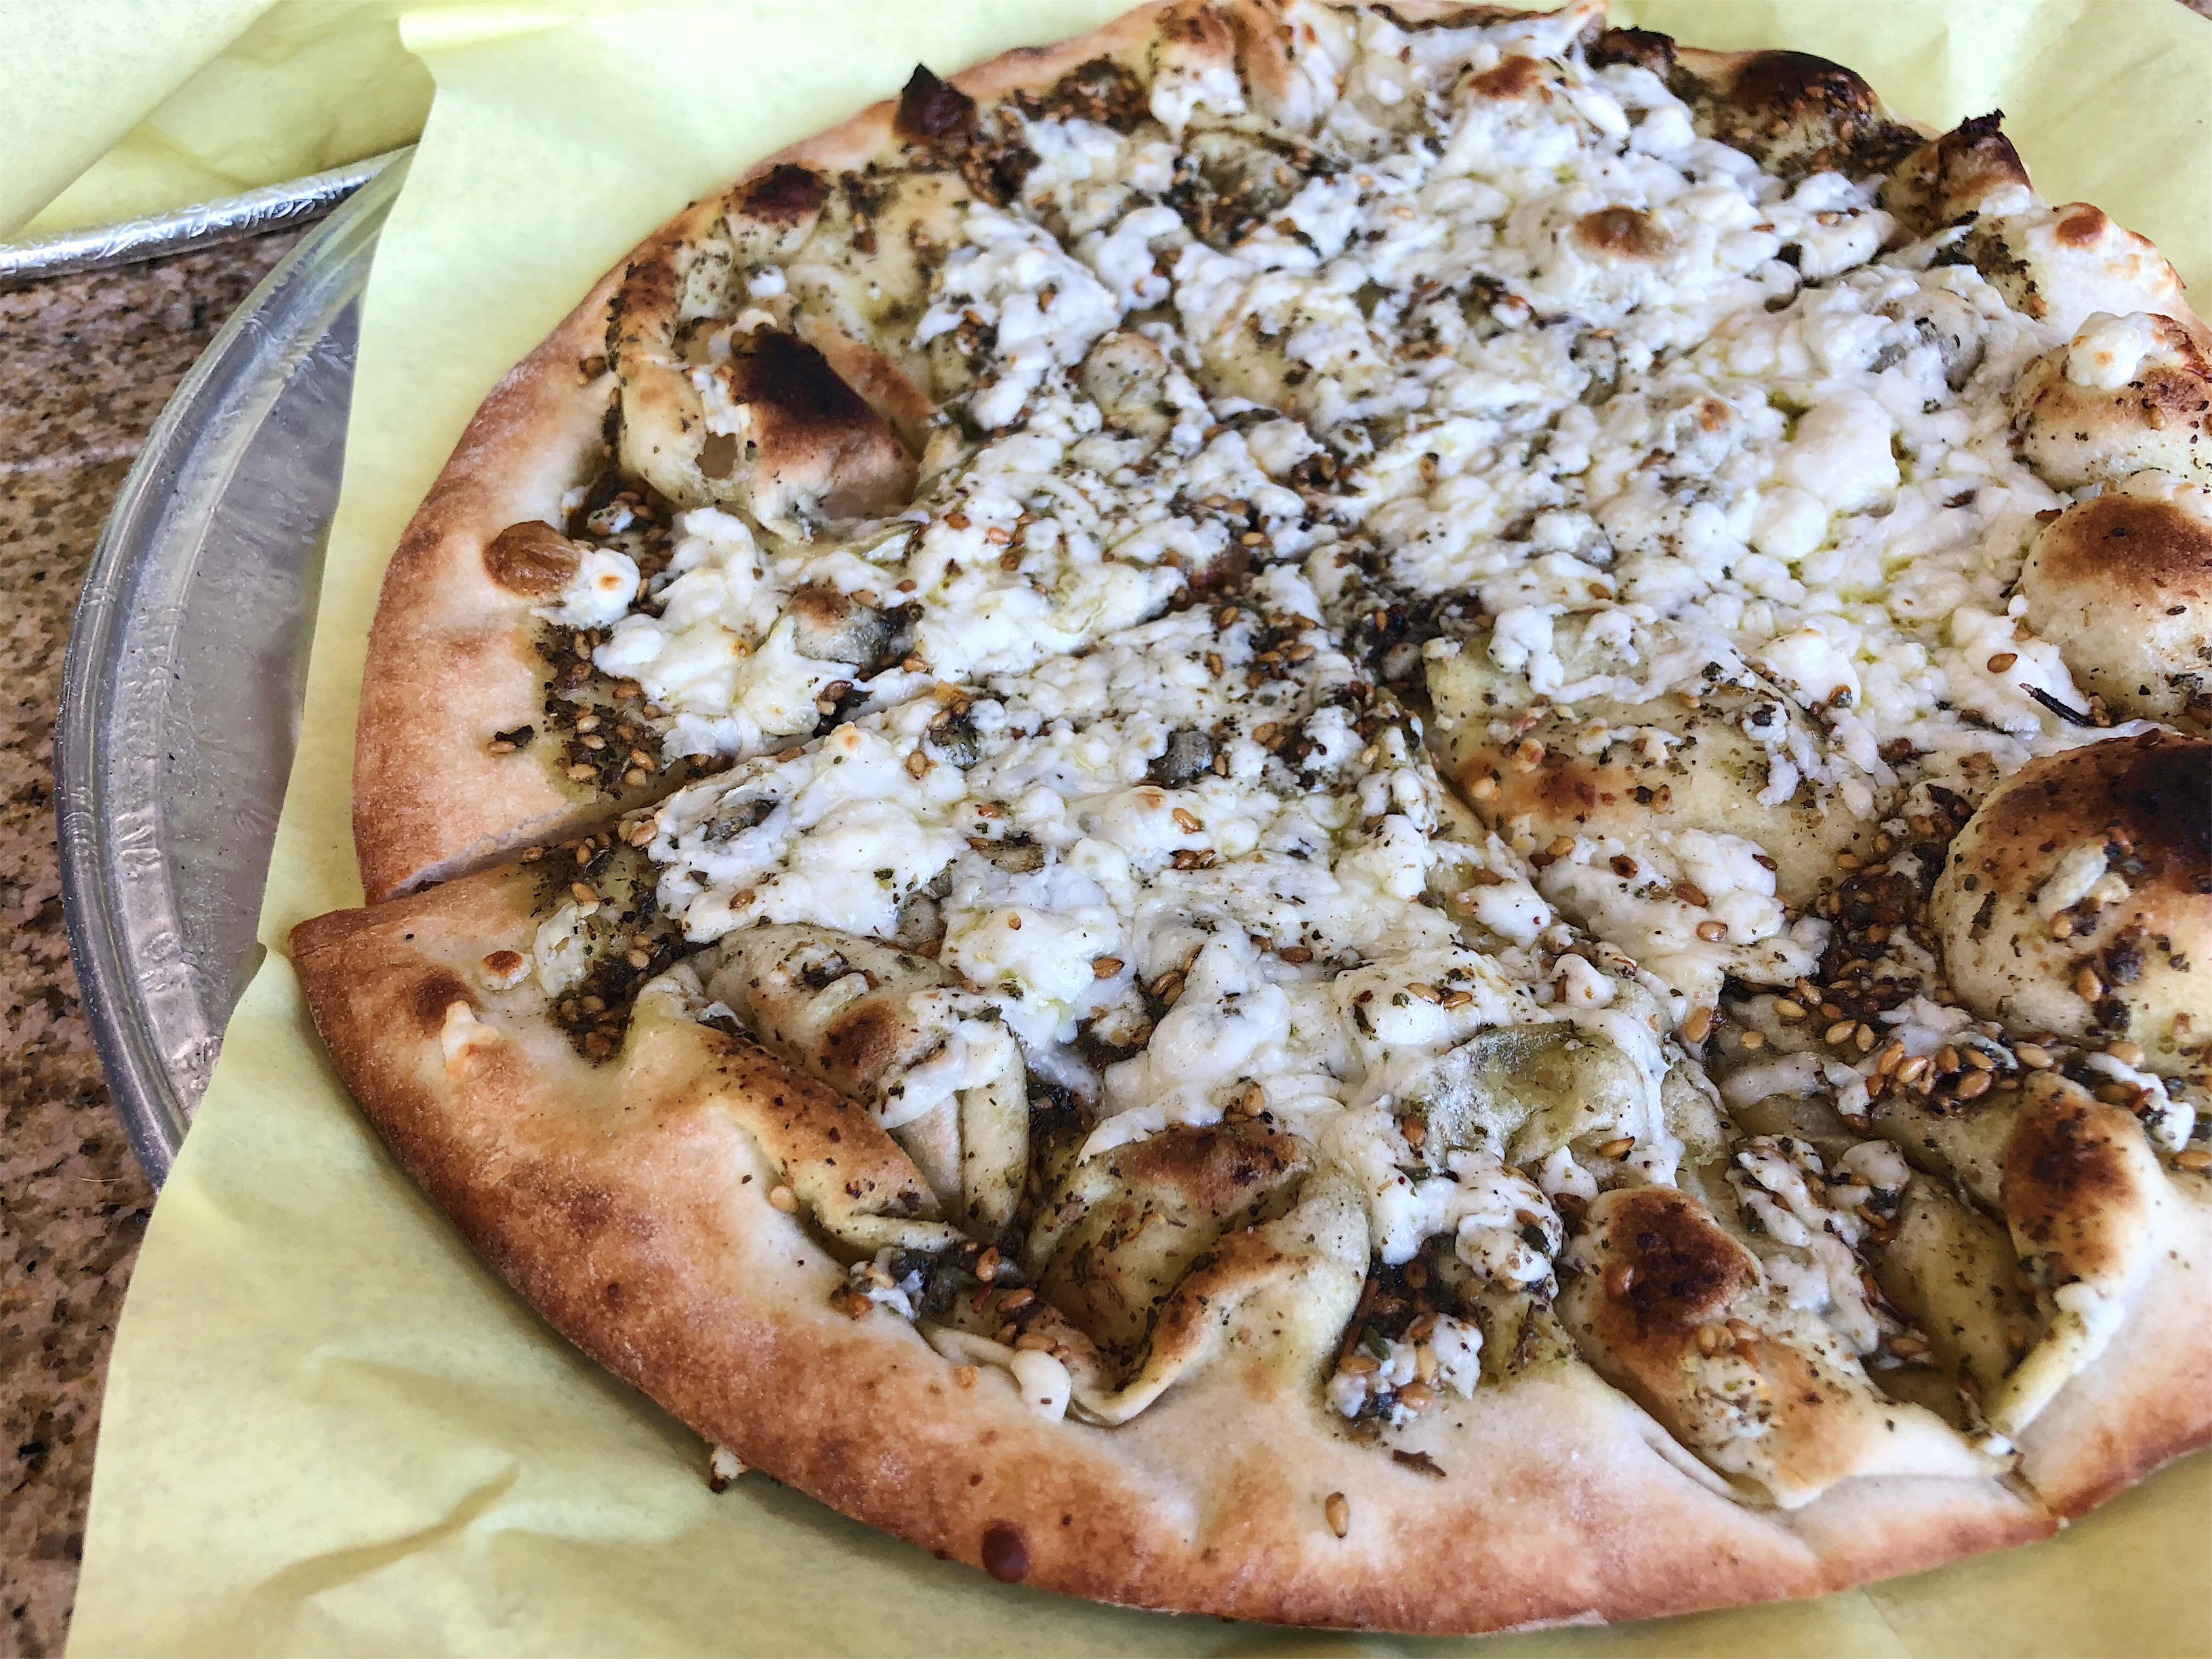 Flatbread topped with melted feta cheese and dark spices at Al Amir Bakery